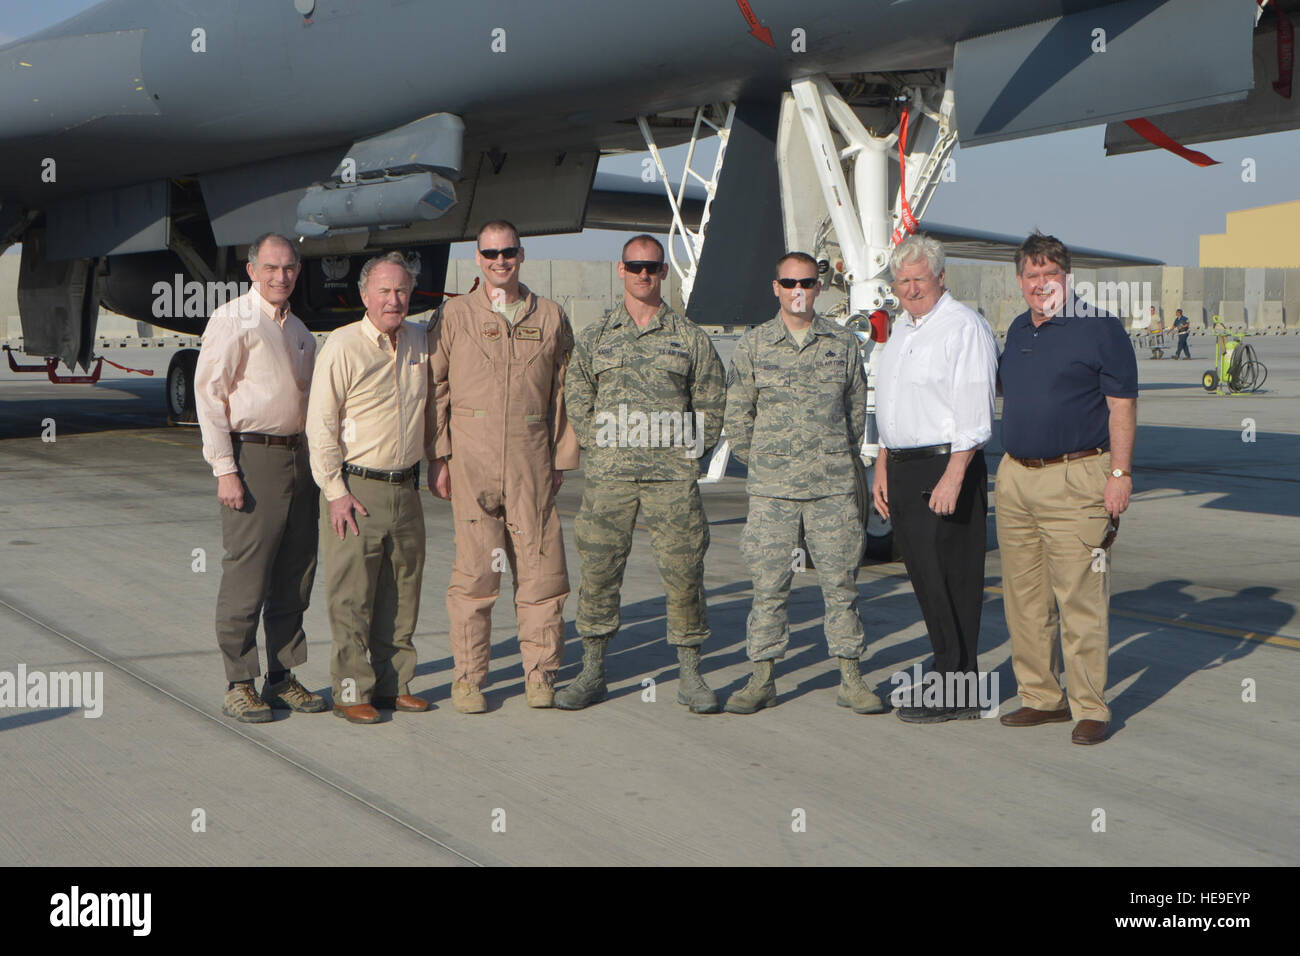 Cong. Peter Visclosky (D-Ind.), Rodney Frelinghuysen (R-N.J.), James Moran (D-Va.) and Ken Calvert (R-Calif.) from the House of Appropriations Committee pose in front of a B1-B Lancer with airmen from the 37th Expeditionary Bomb Squadron at Al Udeid Air Base, Qatar, Feb. 18, 2014. The congressmen visited five Air Force airframes deployed here and were briefed on the capability of multiple units on base who support the U. S. Air Forces Central Command area of responsibility and Operation Enduring Freedom. The congressmen also had lunch with Airmen who are from their represented state to discuss Stock Photo